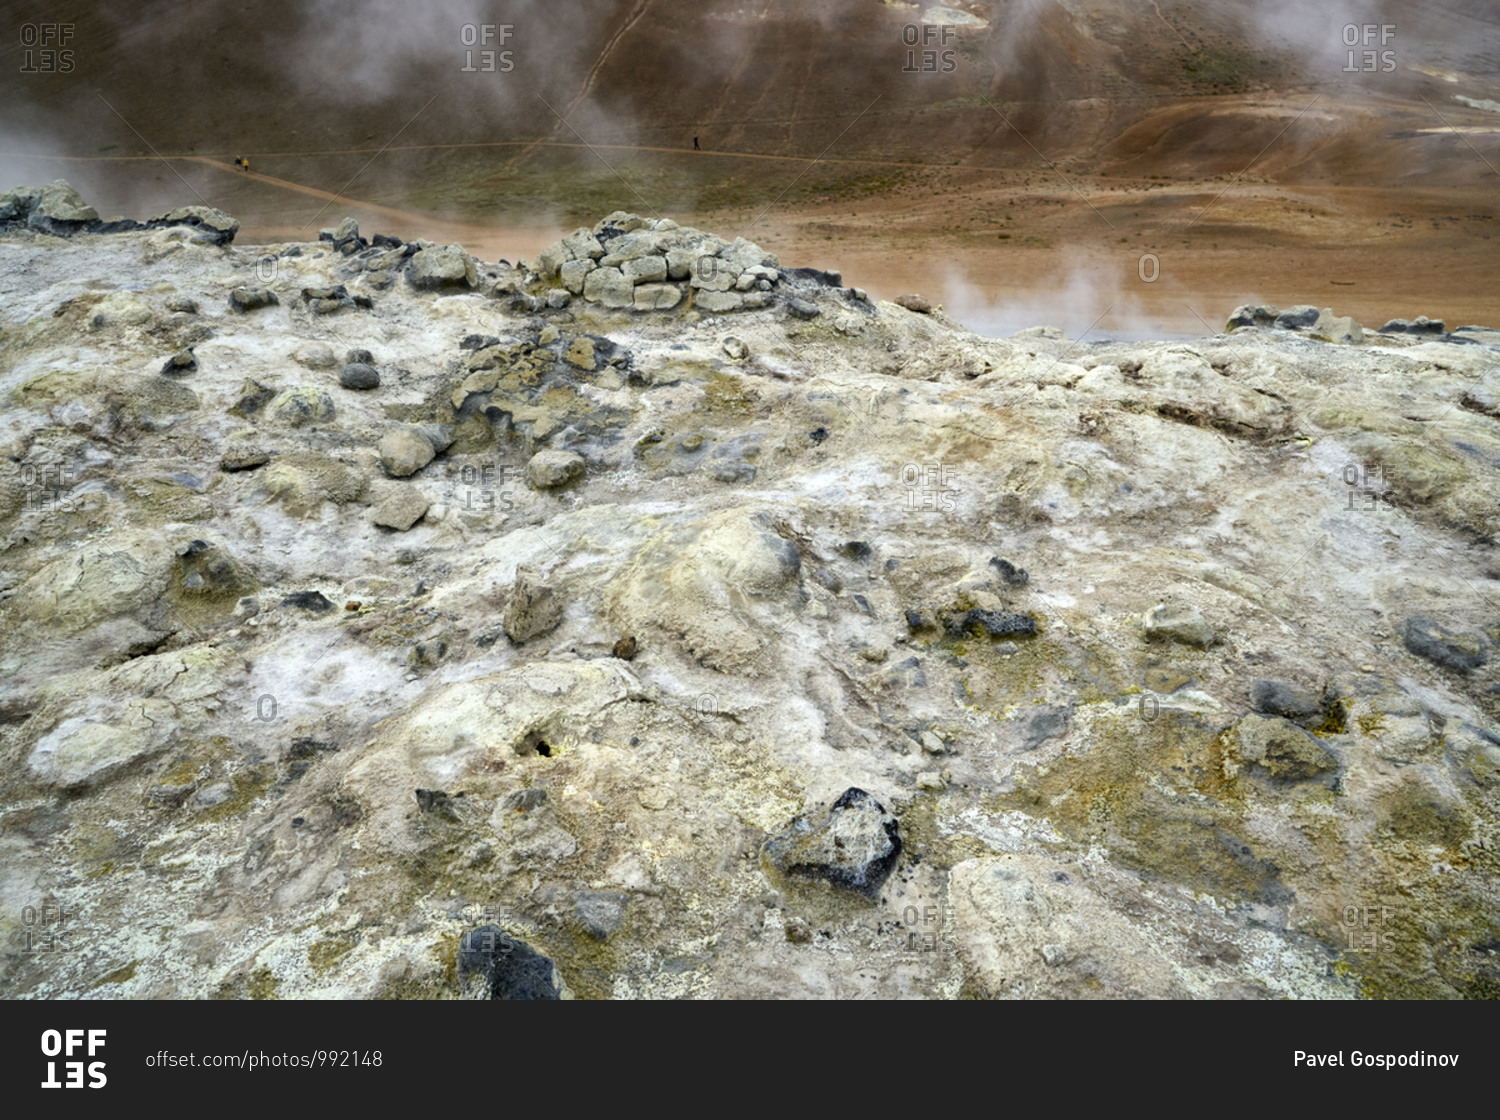 Sulfuric gas rising from the Hverir geothermal spot in Iceland